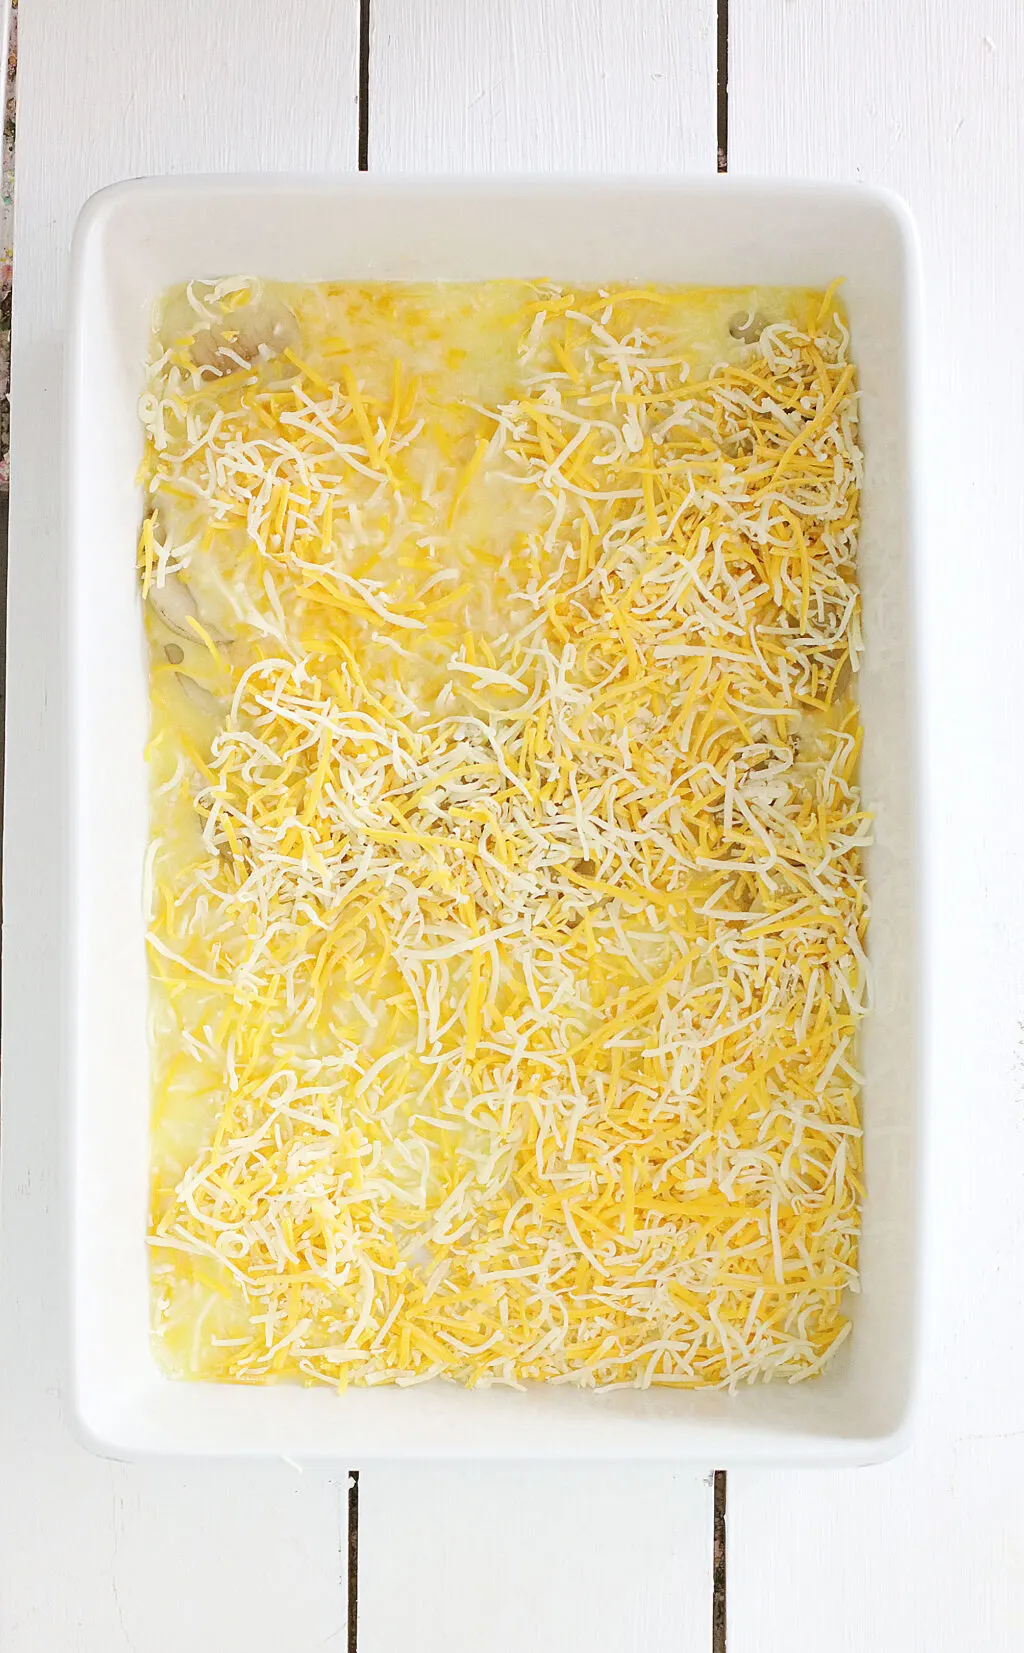 shredded cheese sprinkled on top of potatoes in casserole dish